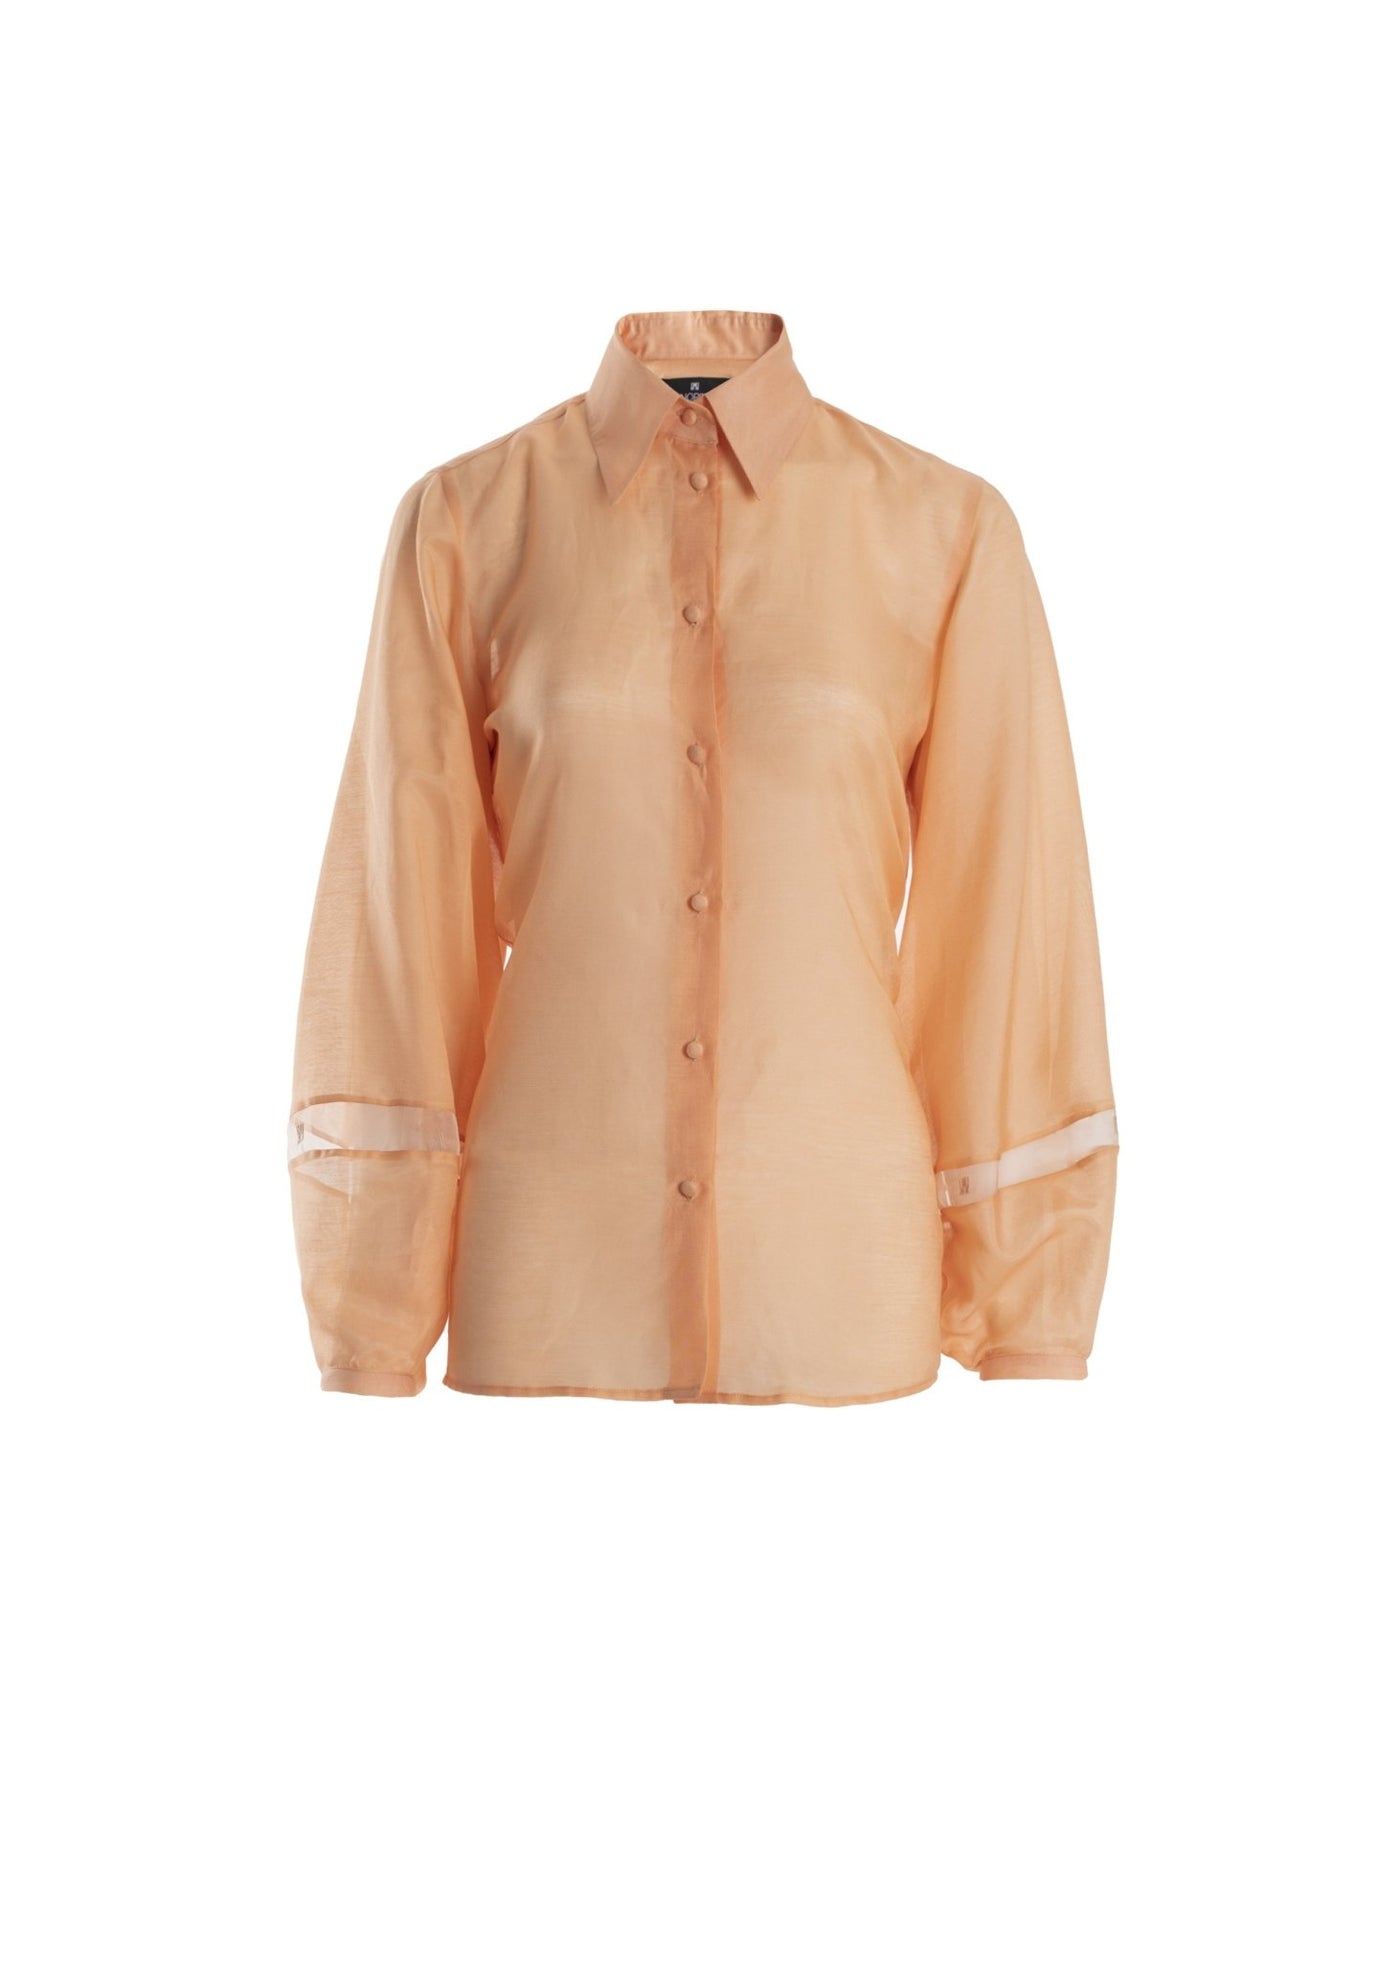 Coral NOPIN Silk Shirt - The Clothing LoungeNOPIN